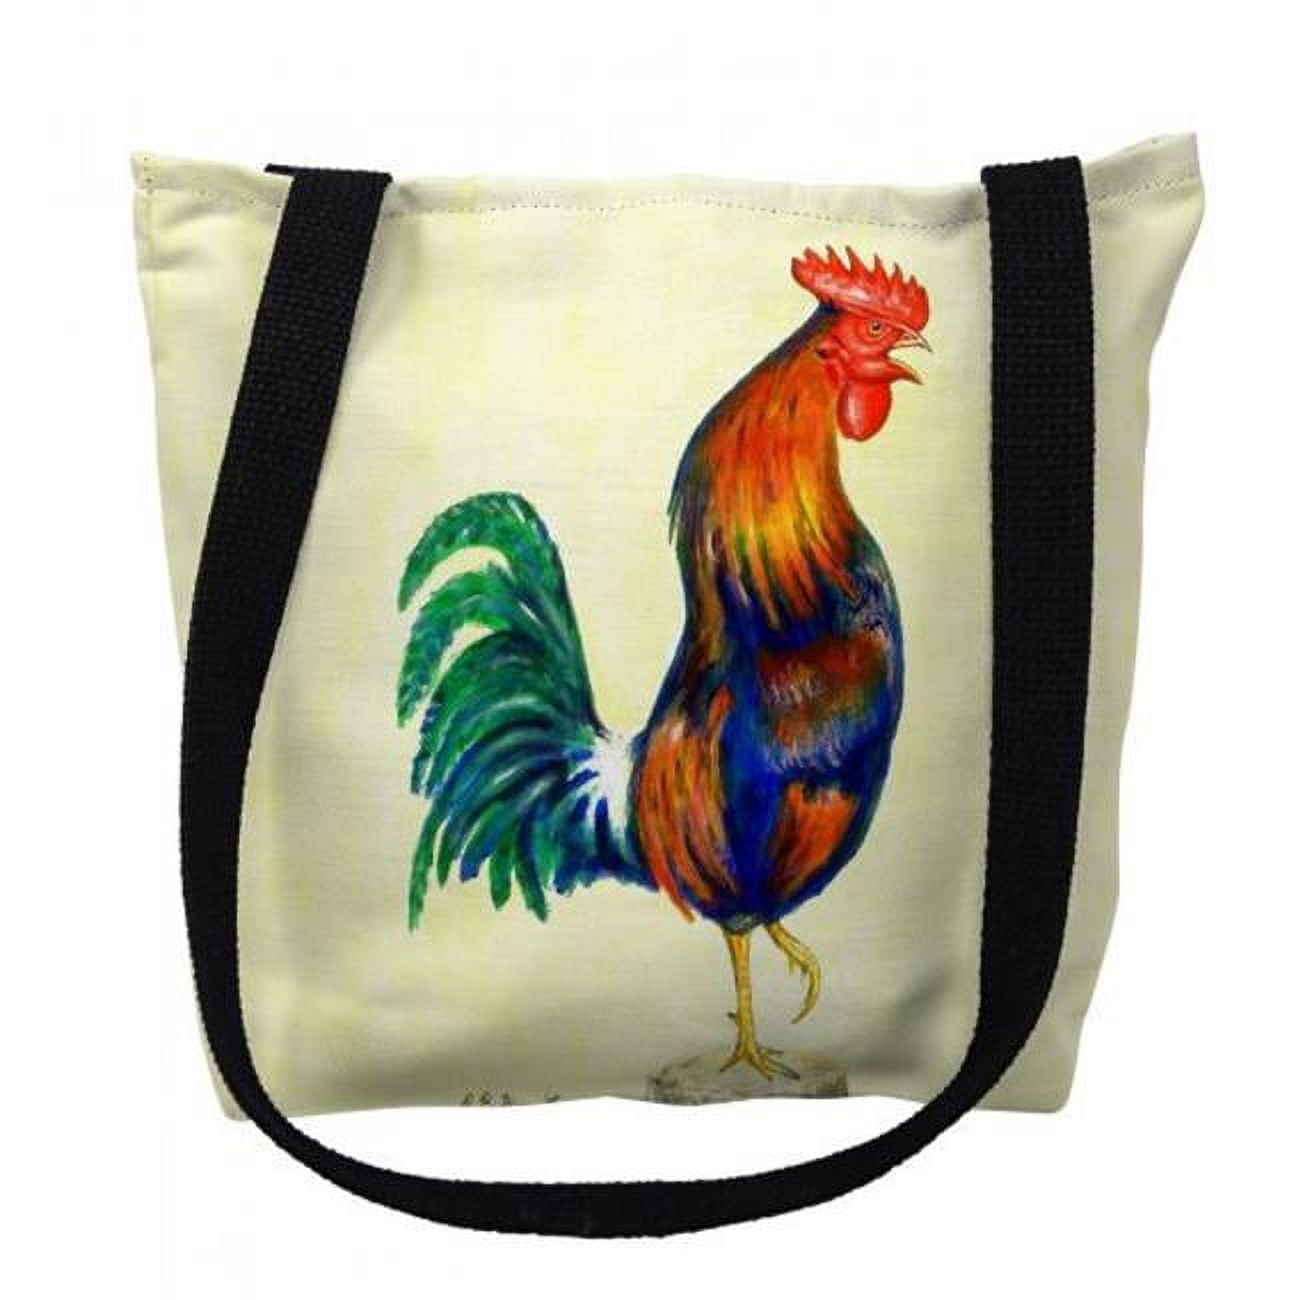 Ty037m 16 X 16 In. Blue Rooster Tote Bag - Medium